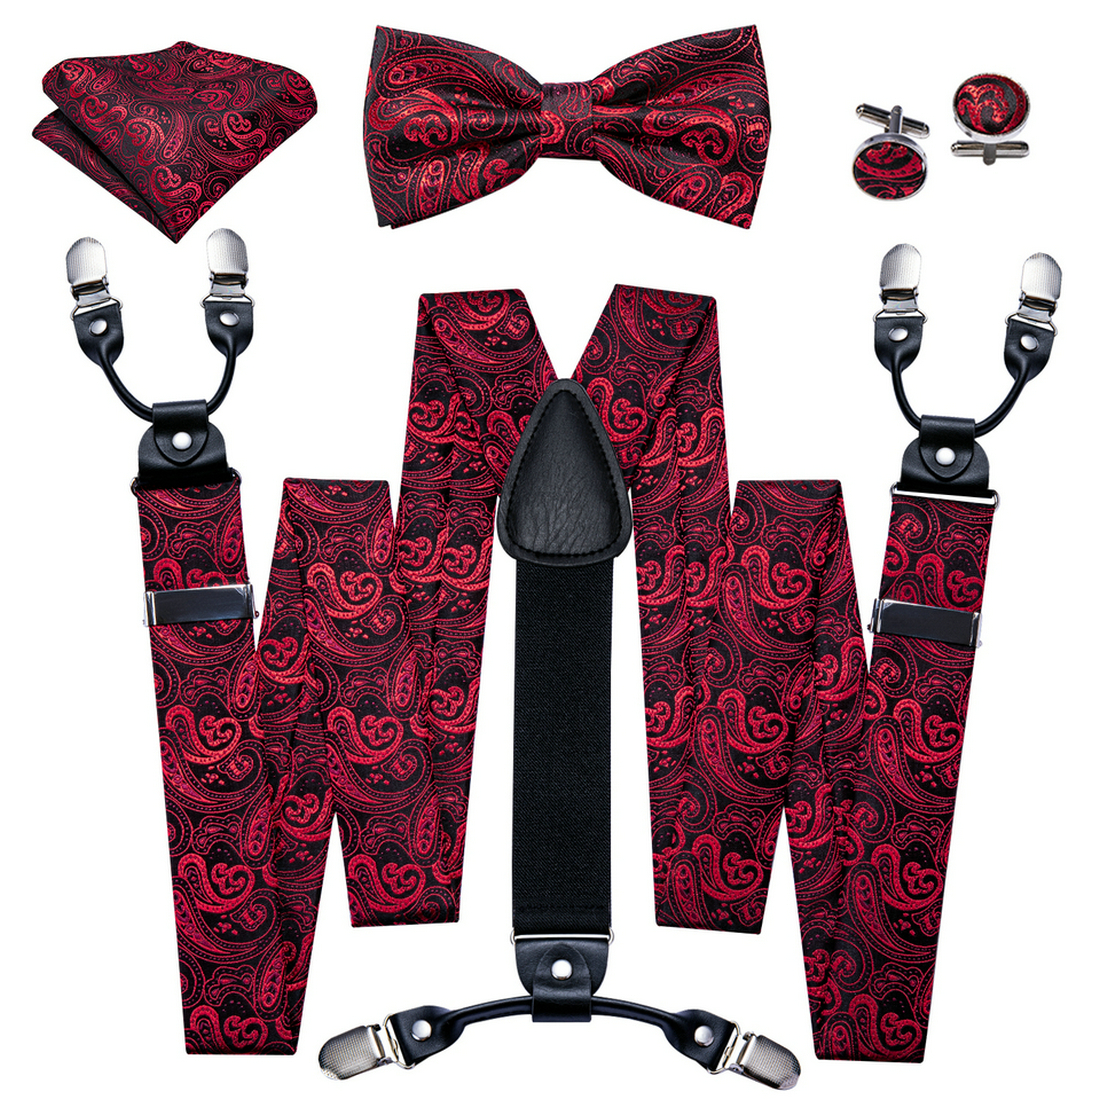 Barry Wang Mens Suspender Tie Set Adjustable Clips Y Type Suspender Floral  Paisley Jacquare Silk Necktie Handkerchief Cufflinks Formal Wedding  Accessories Purple Red Green Blue Gold Black Ideal Choice For Gifts 